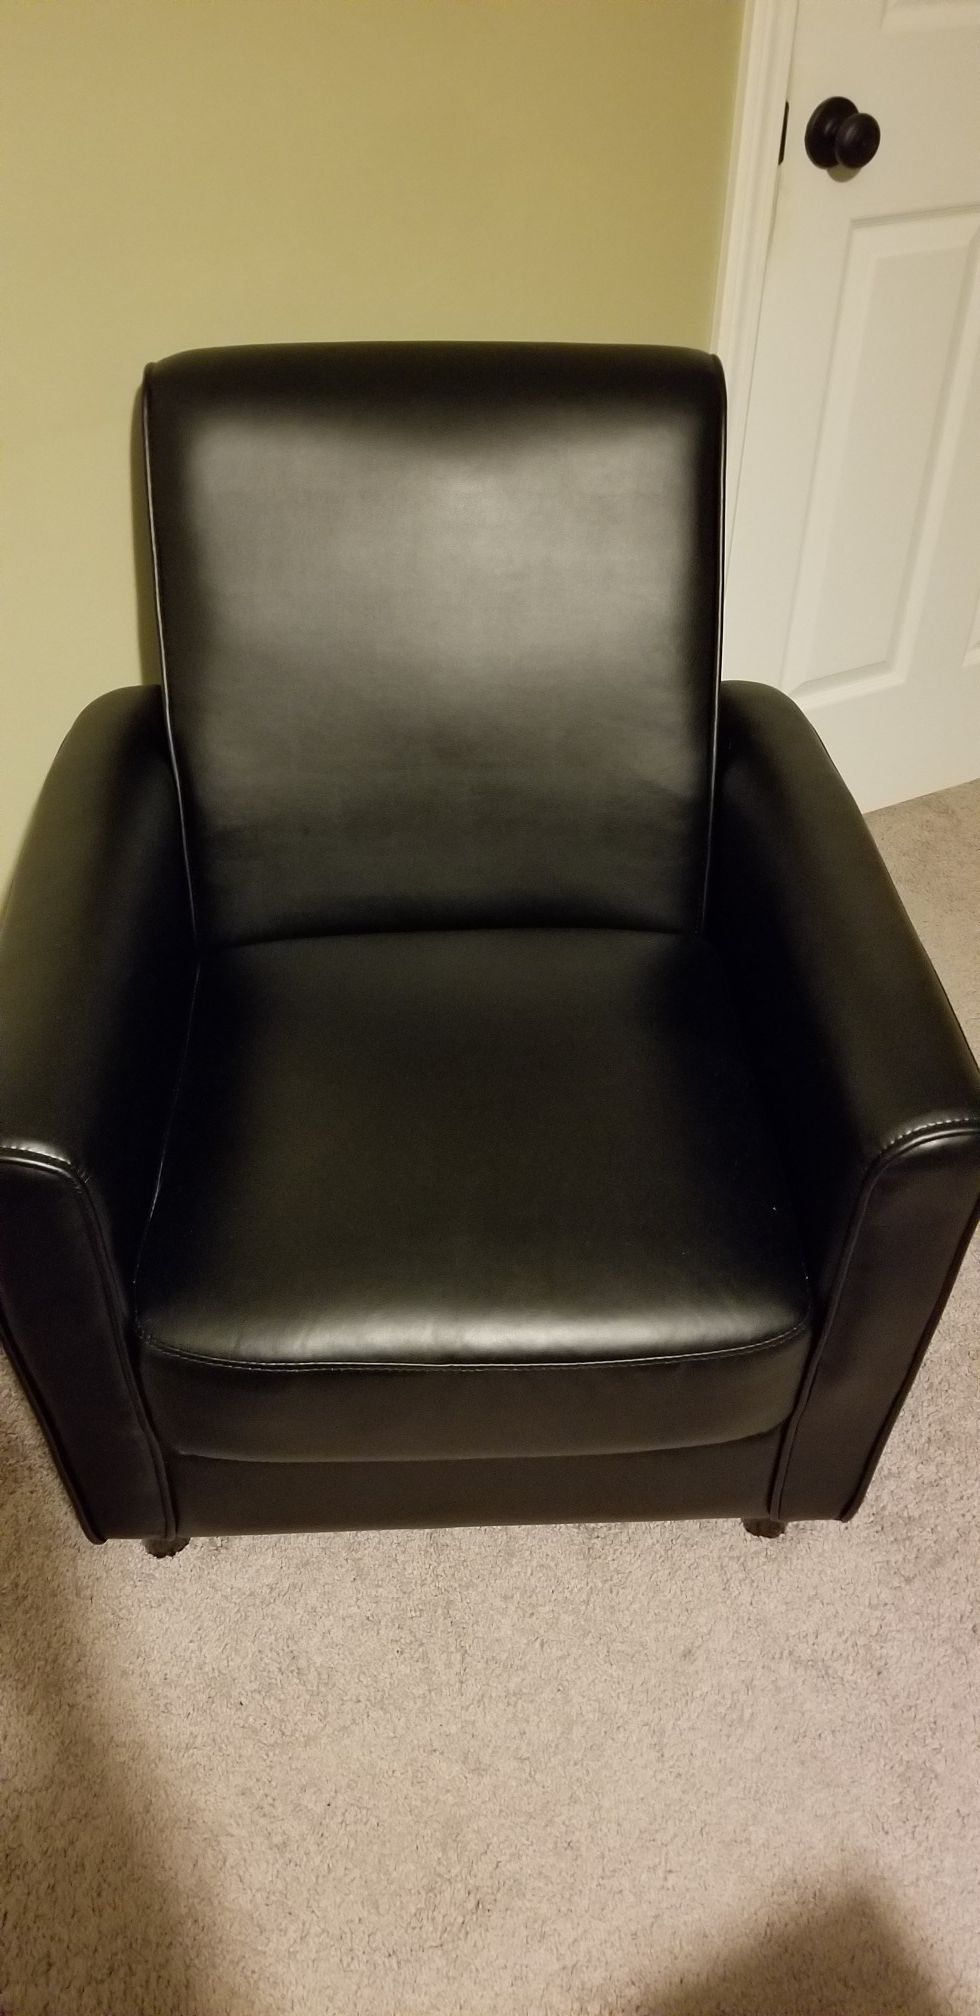 Black chair for sale